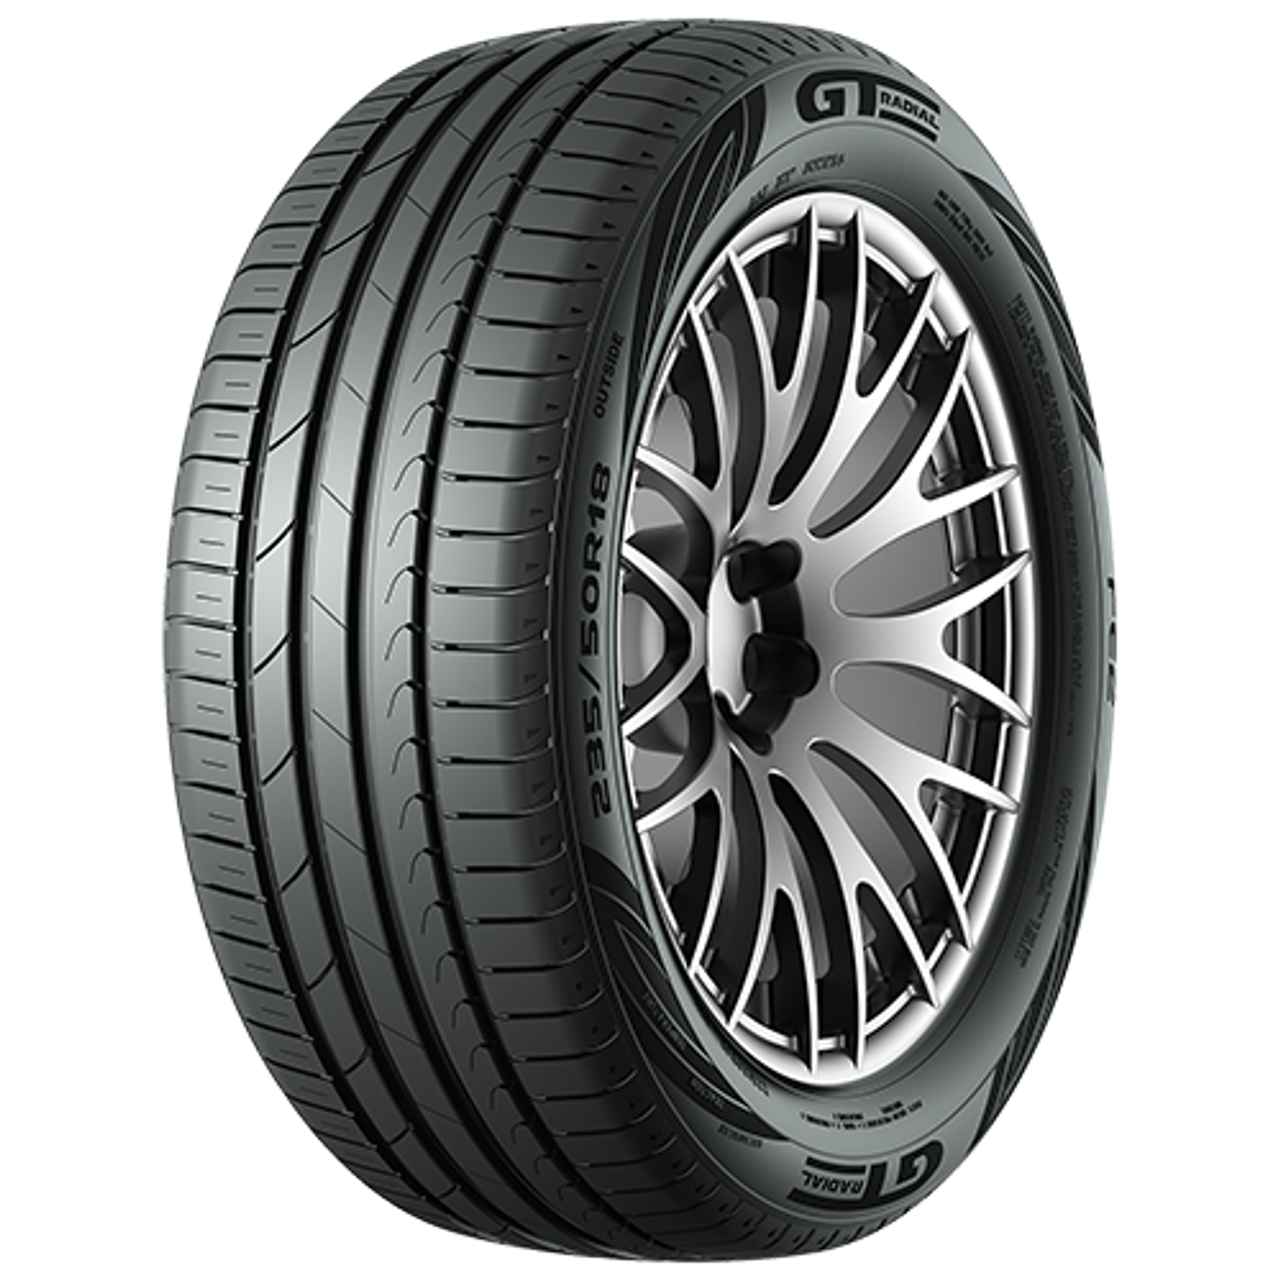 GT-RADIAL FE2 185/65R15 88H BSW